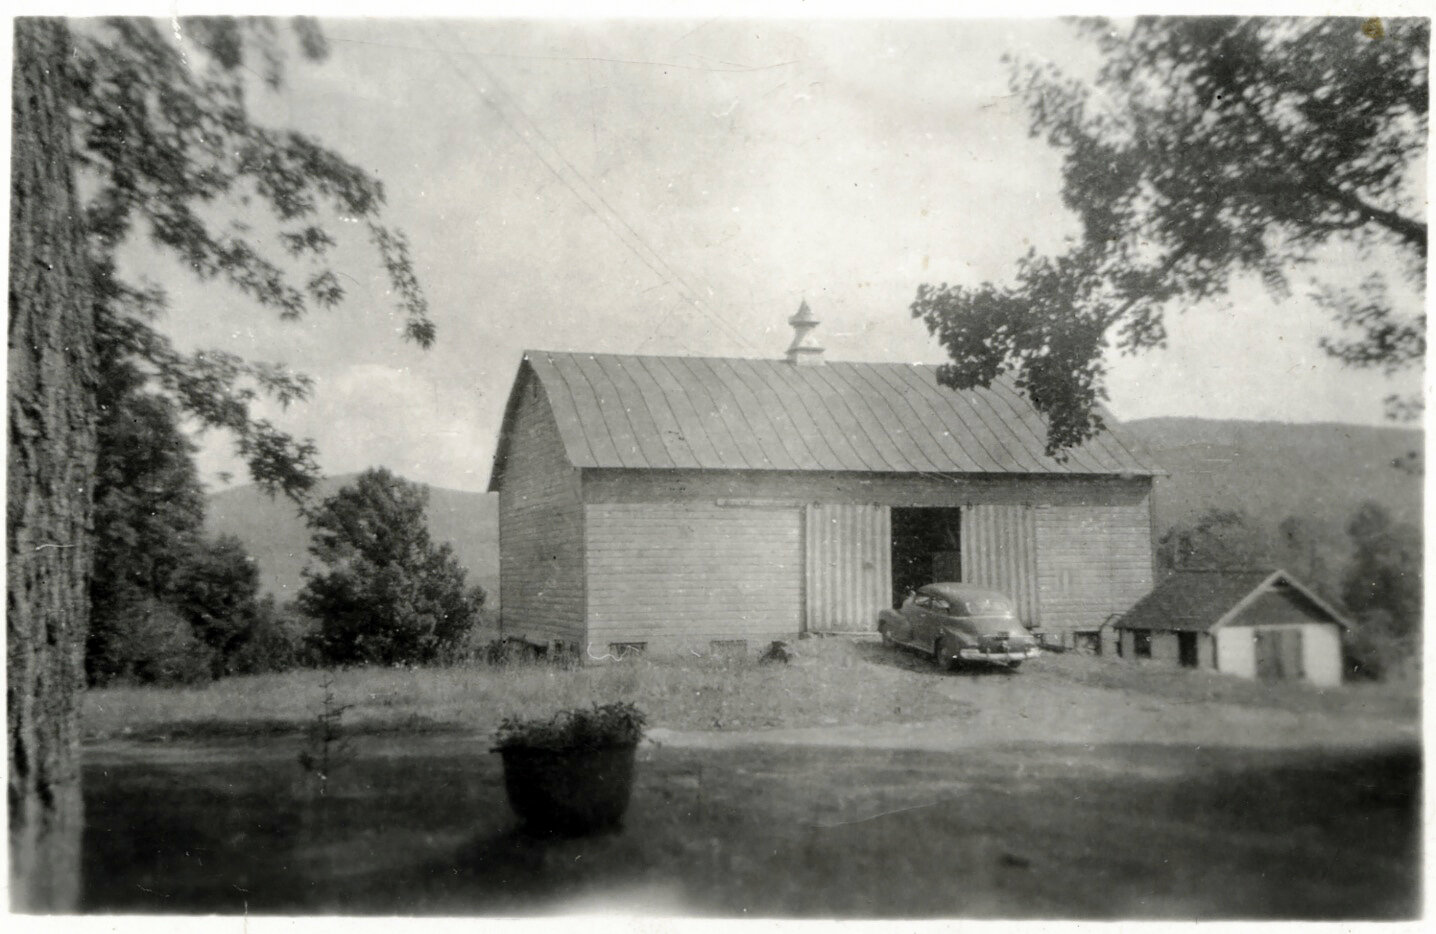  My second photograph:  Mamie’s Barn, July 1951     